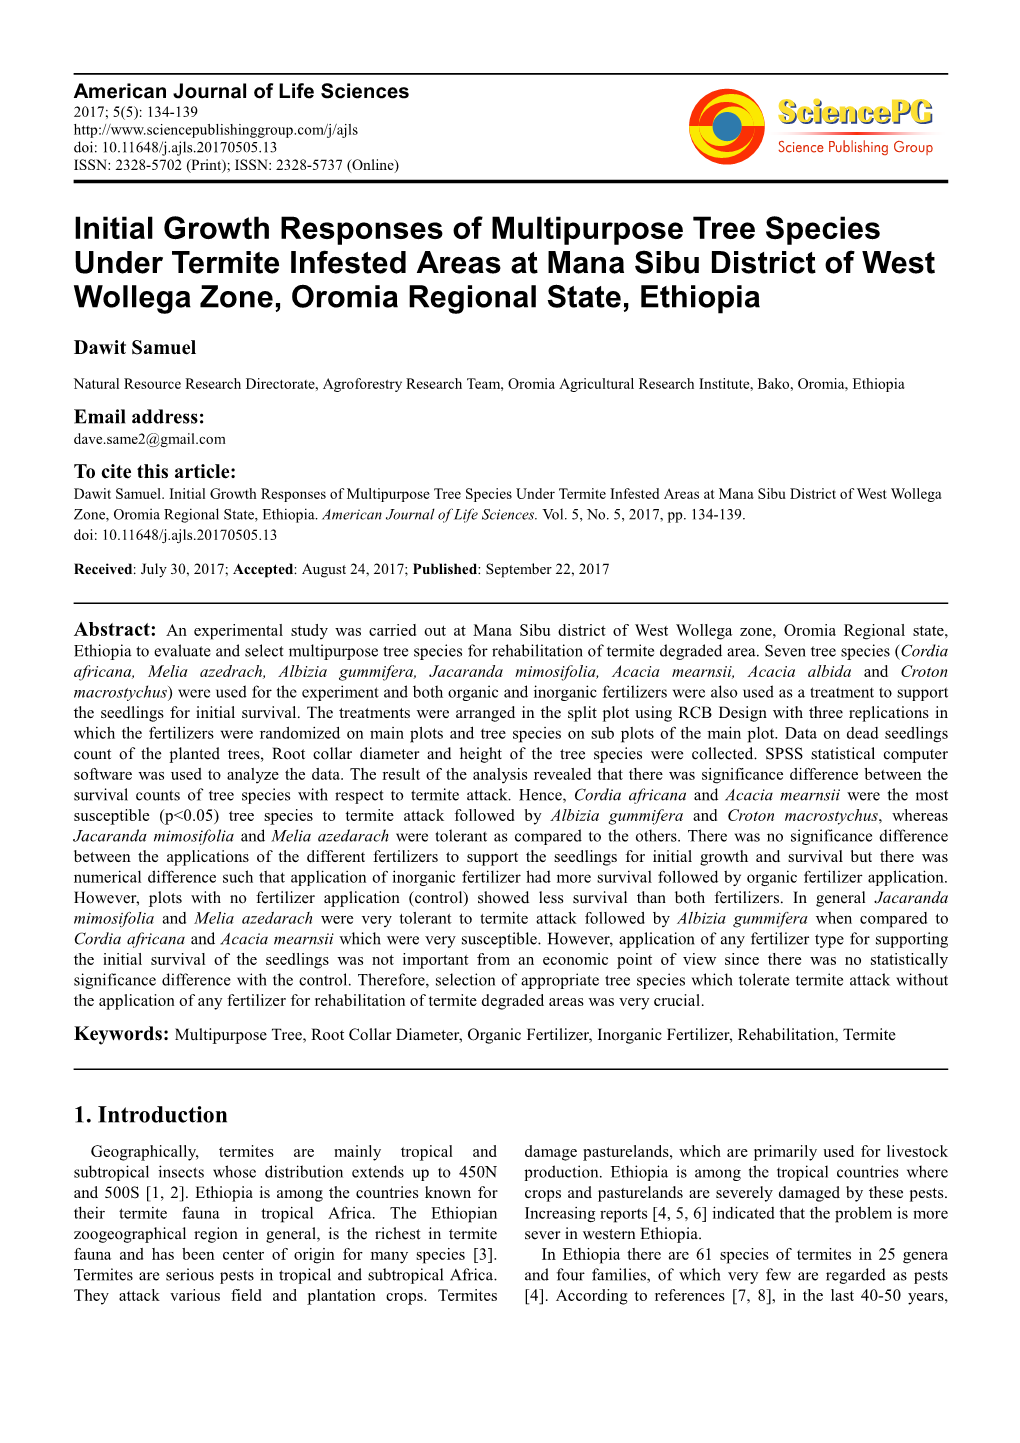 Initial Growth Responses of Multipurpose Tree Species Under Termite Infested Areas at Mana Sibu District of West Wollega Zone, Oromia Regional State, Ethiopia